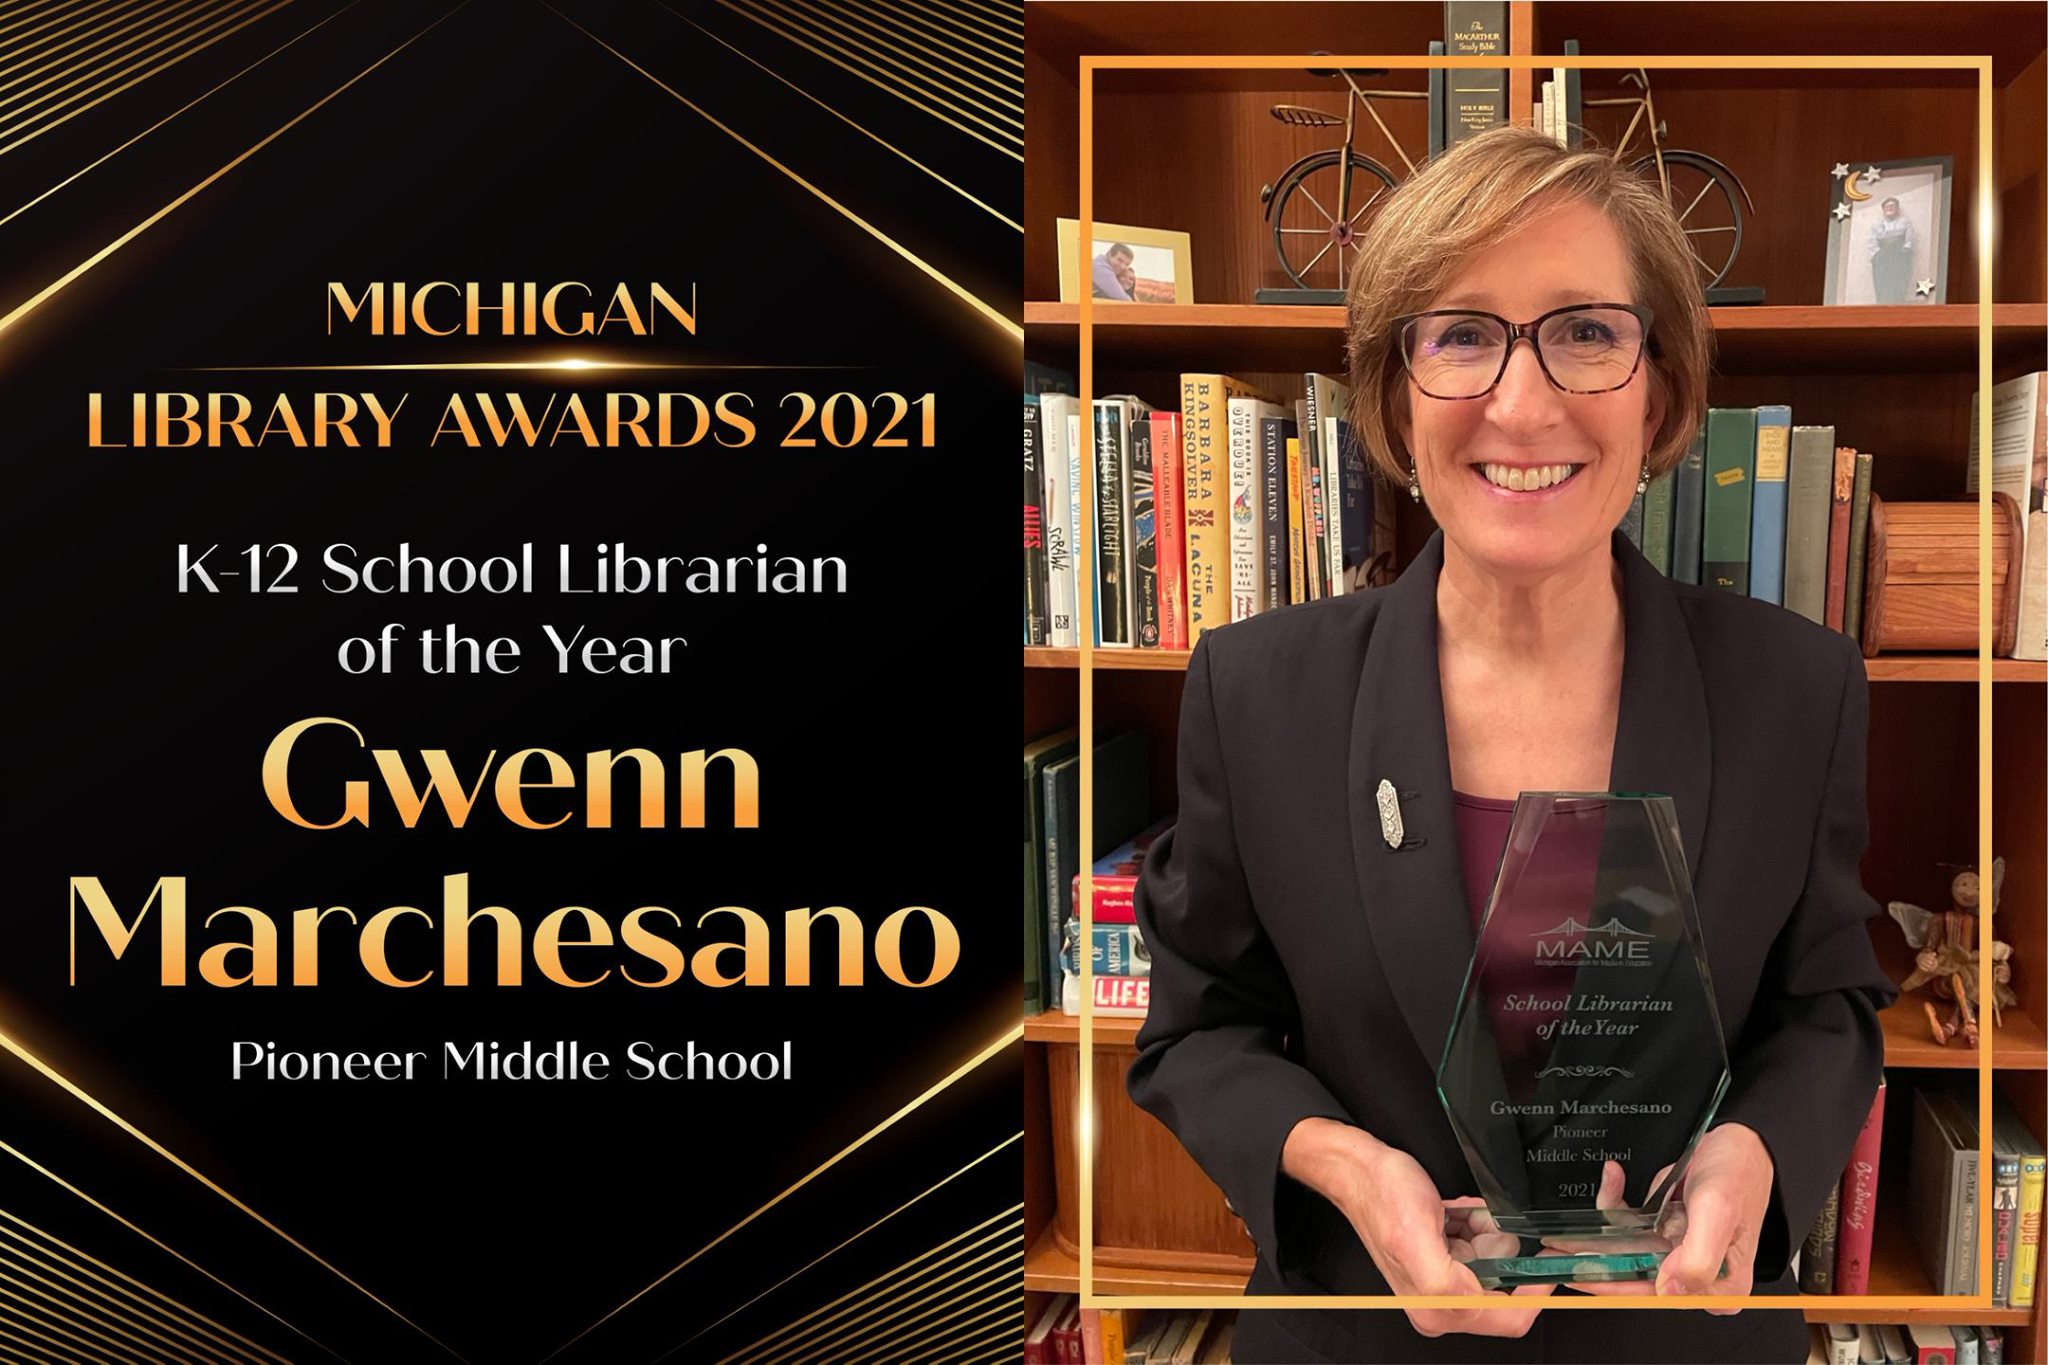 SIS Alumna Gwenn Marchesano is pictured with her Michigan Library Association Award